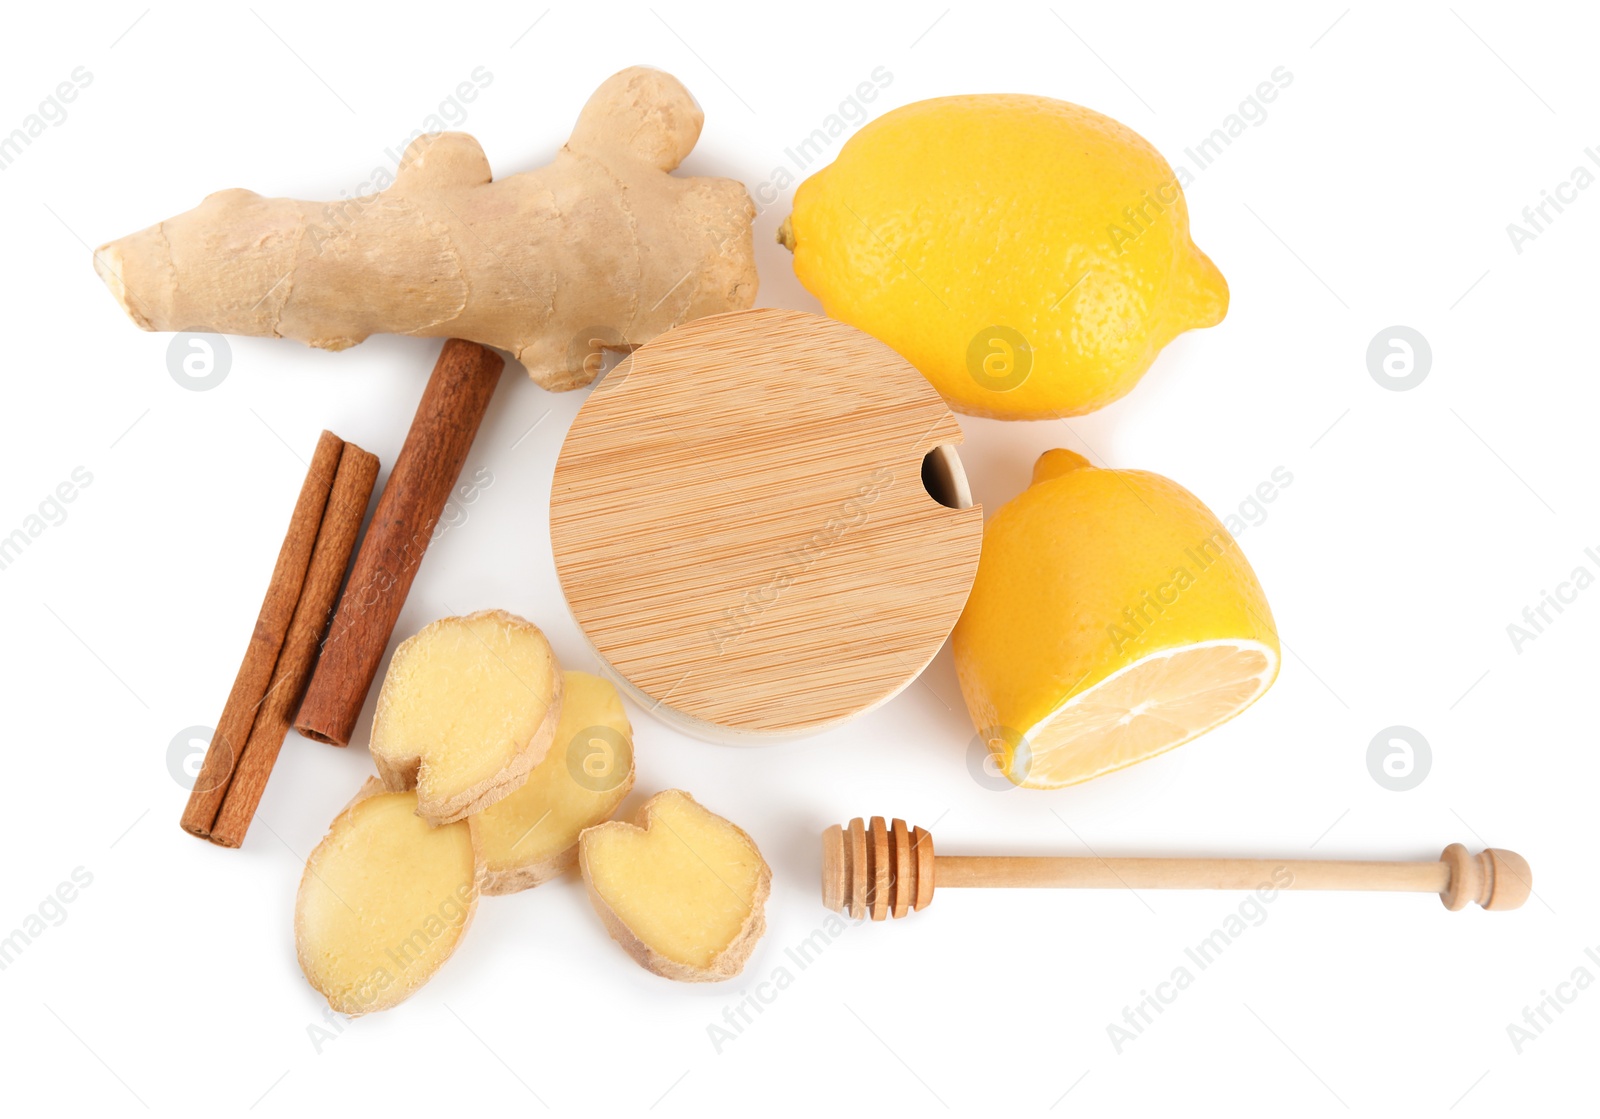 Photo of Composition with cold remedies on white background, top view. Sore throat treatment